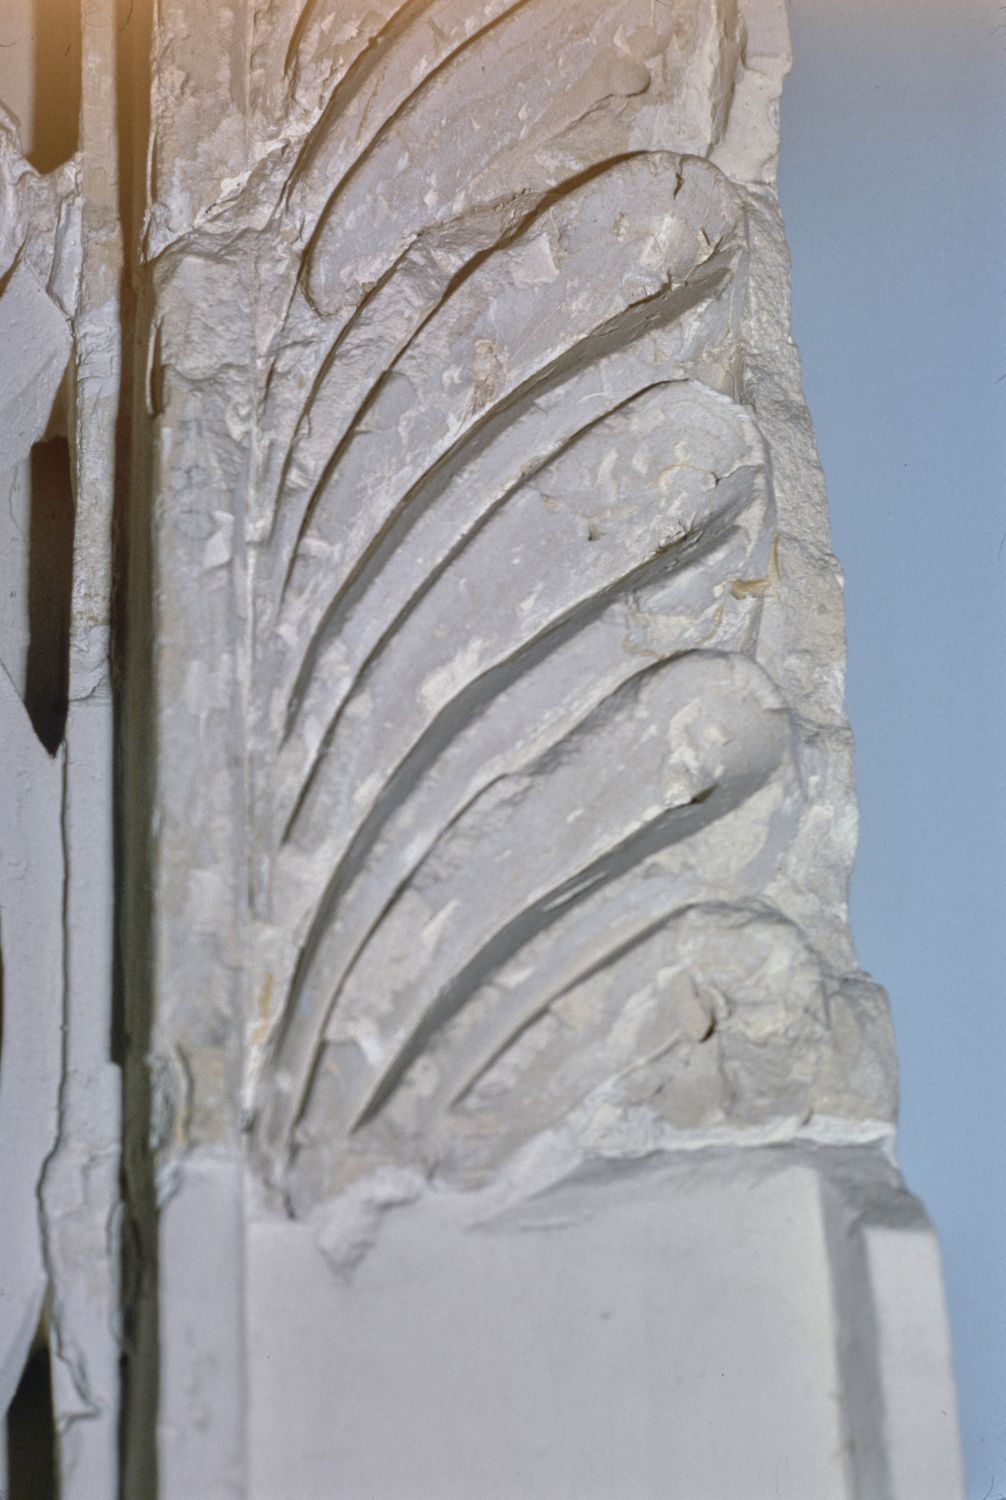 Detail of a stucco molding from Qasr al-Hayr al-Gharbi displayed in the National Museum, Damascus.